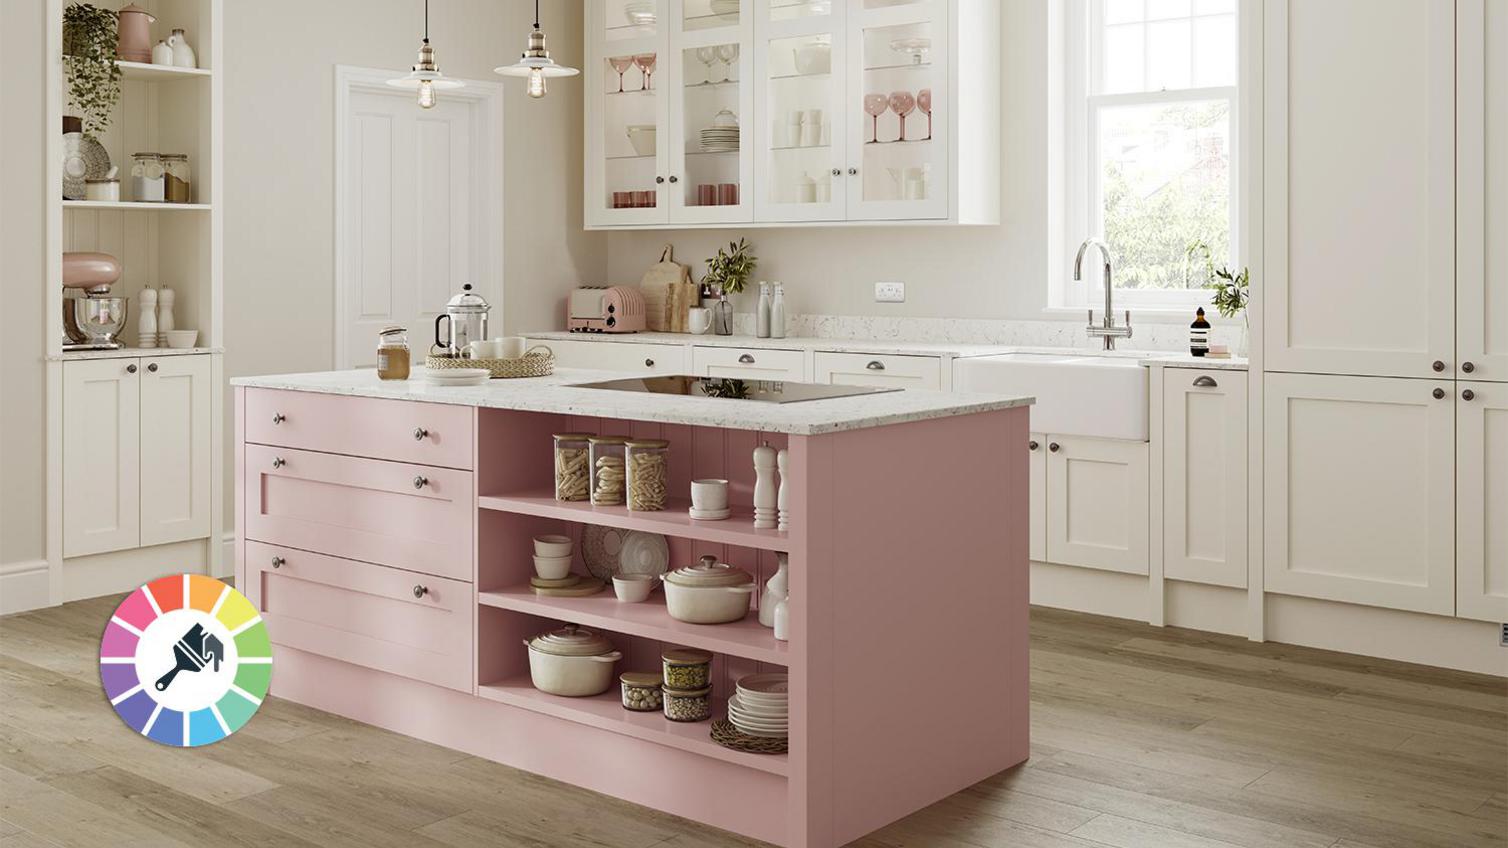 Pink and cream paintable kitchen idea with a contrasting pink island, shaker doors, a white quartz worktop, and open shelves.